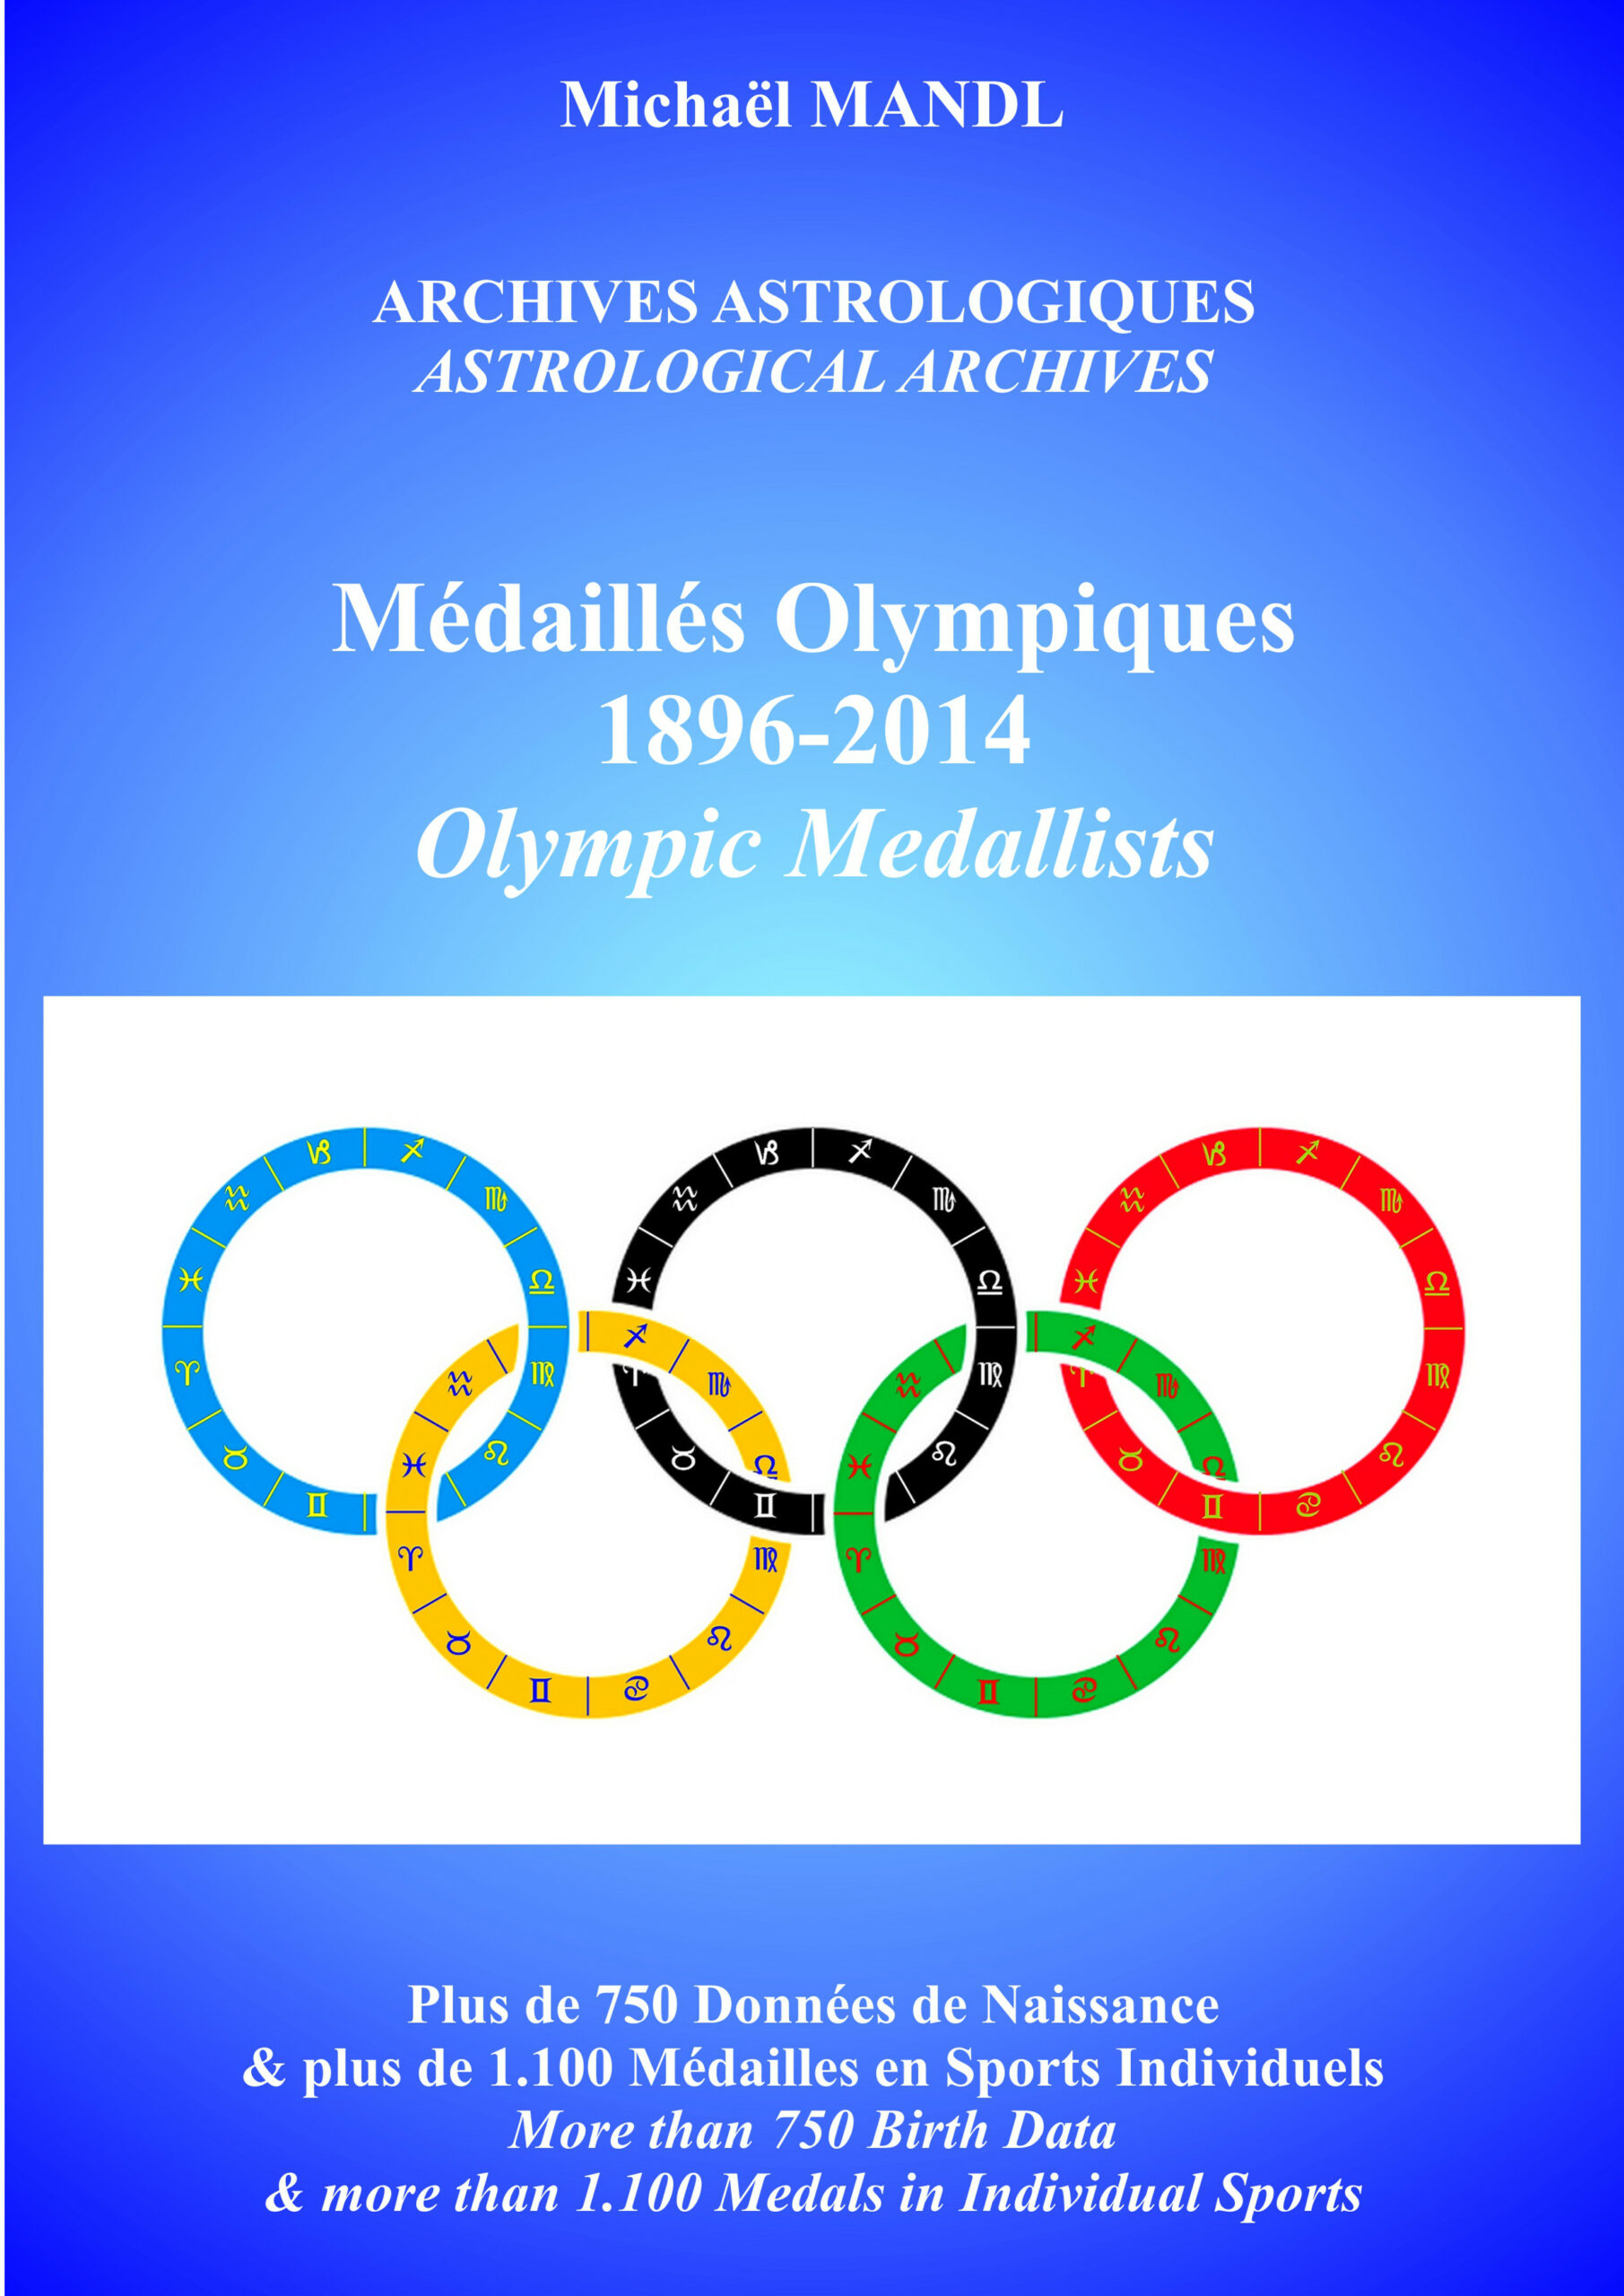 You are currently viewing Médaillés Olympiques 1896-2014 Olympic Medallists